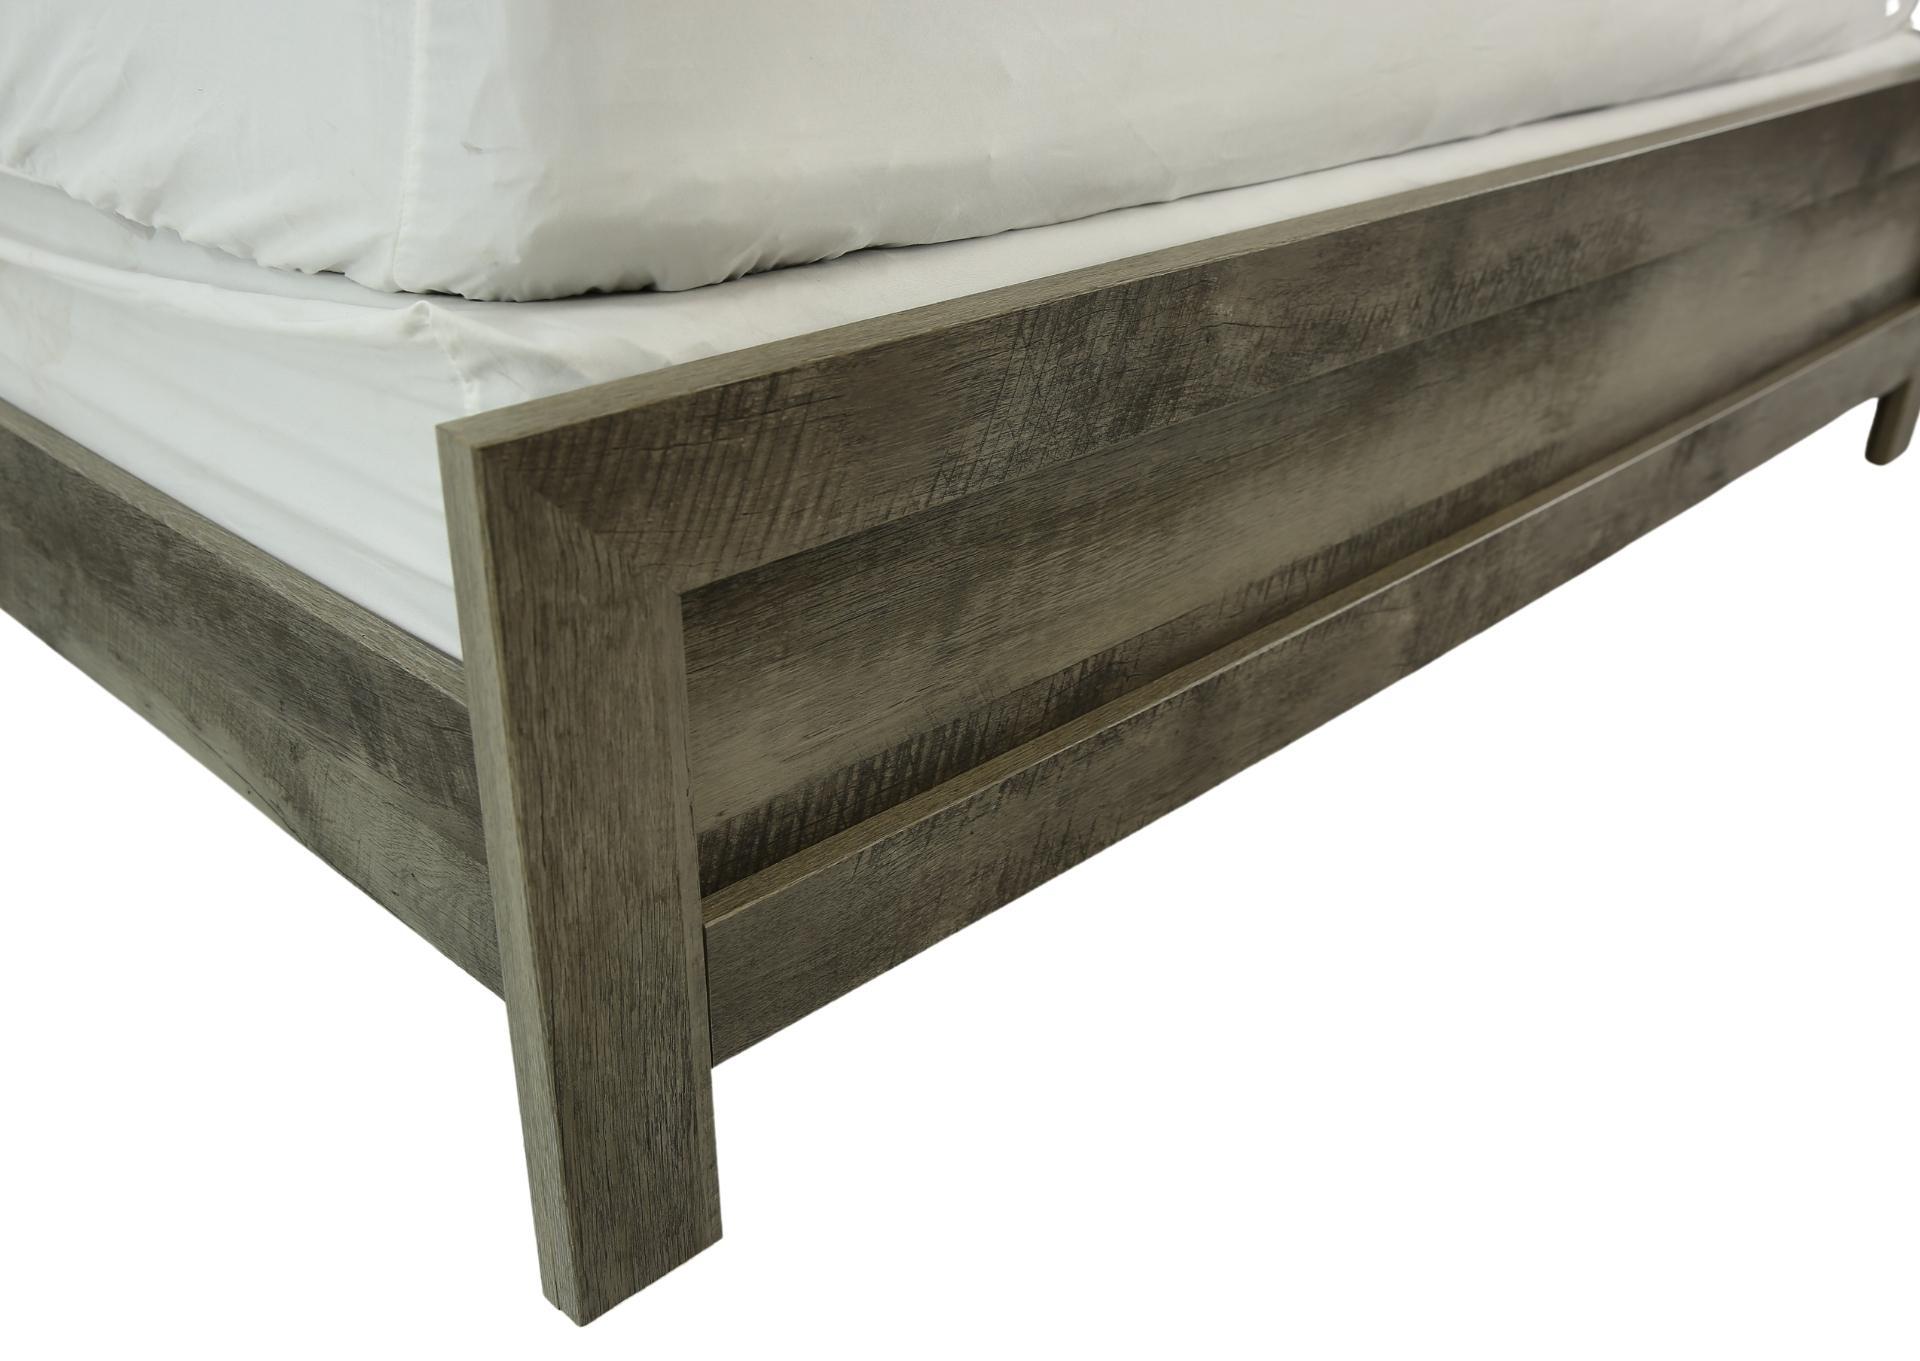 LANGSTON QUEEN BED,KITH FURNITURE